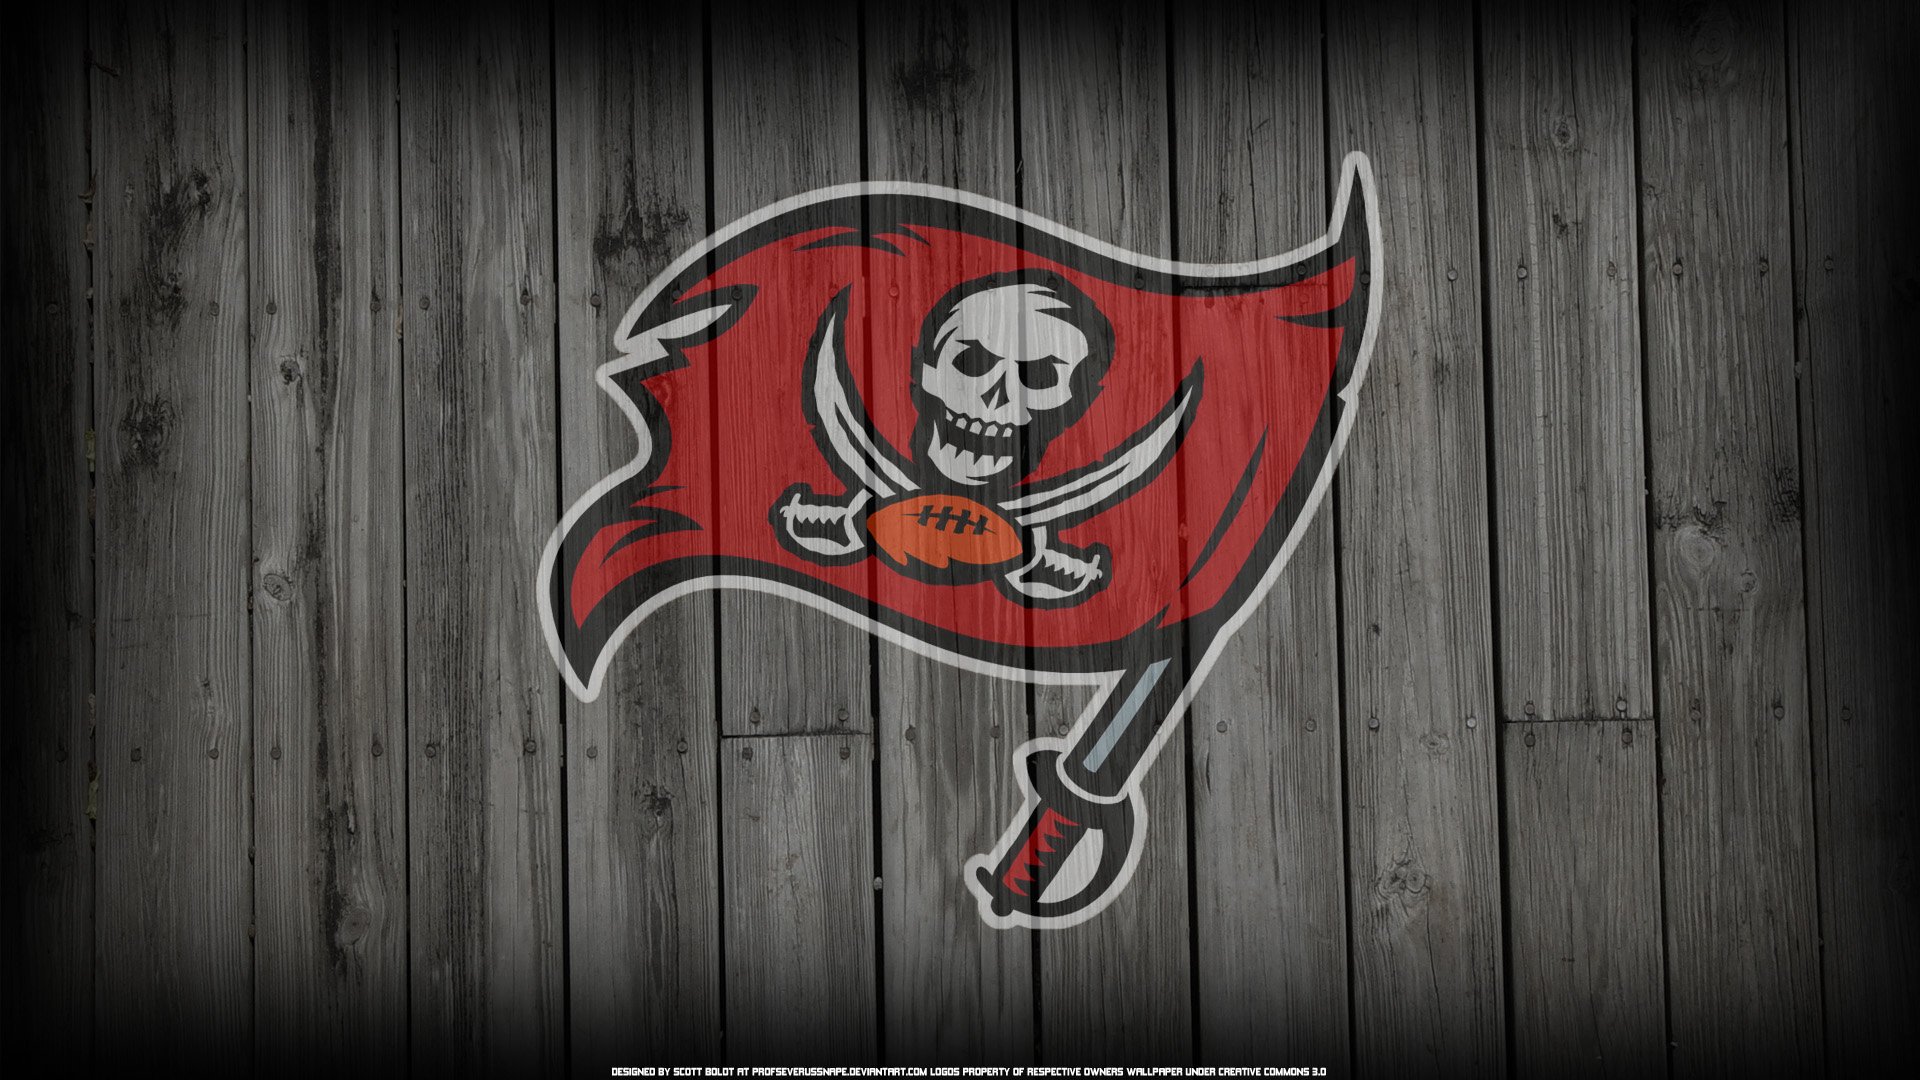 Tampa Bay Logo on Wood by ProfSeverusSnape 1920 x 1080 1920x1080